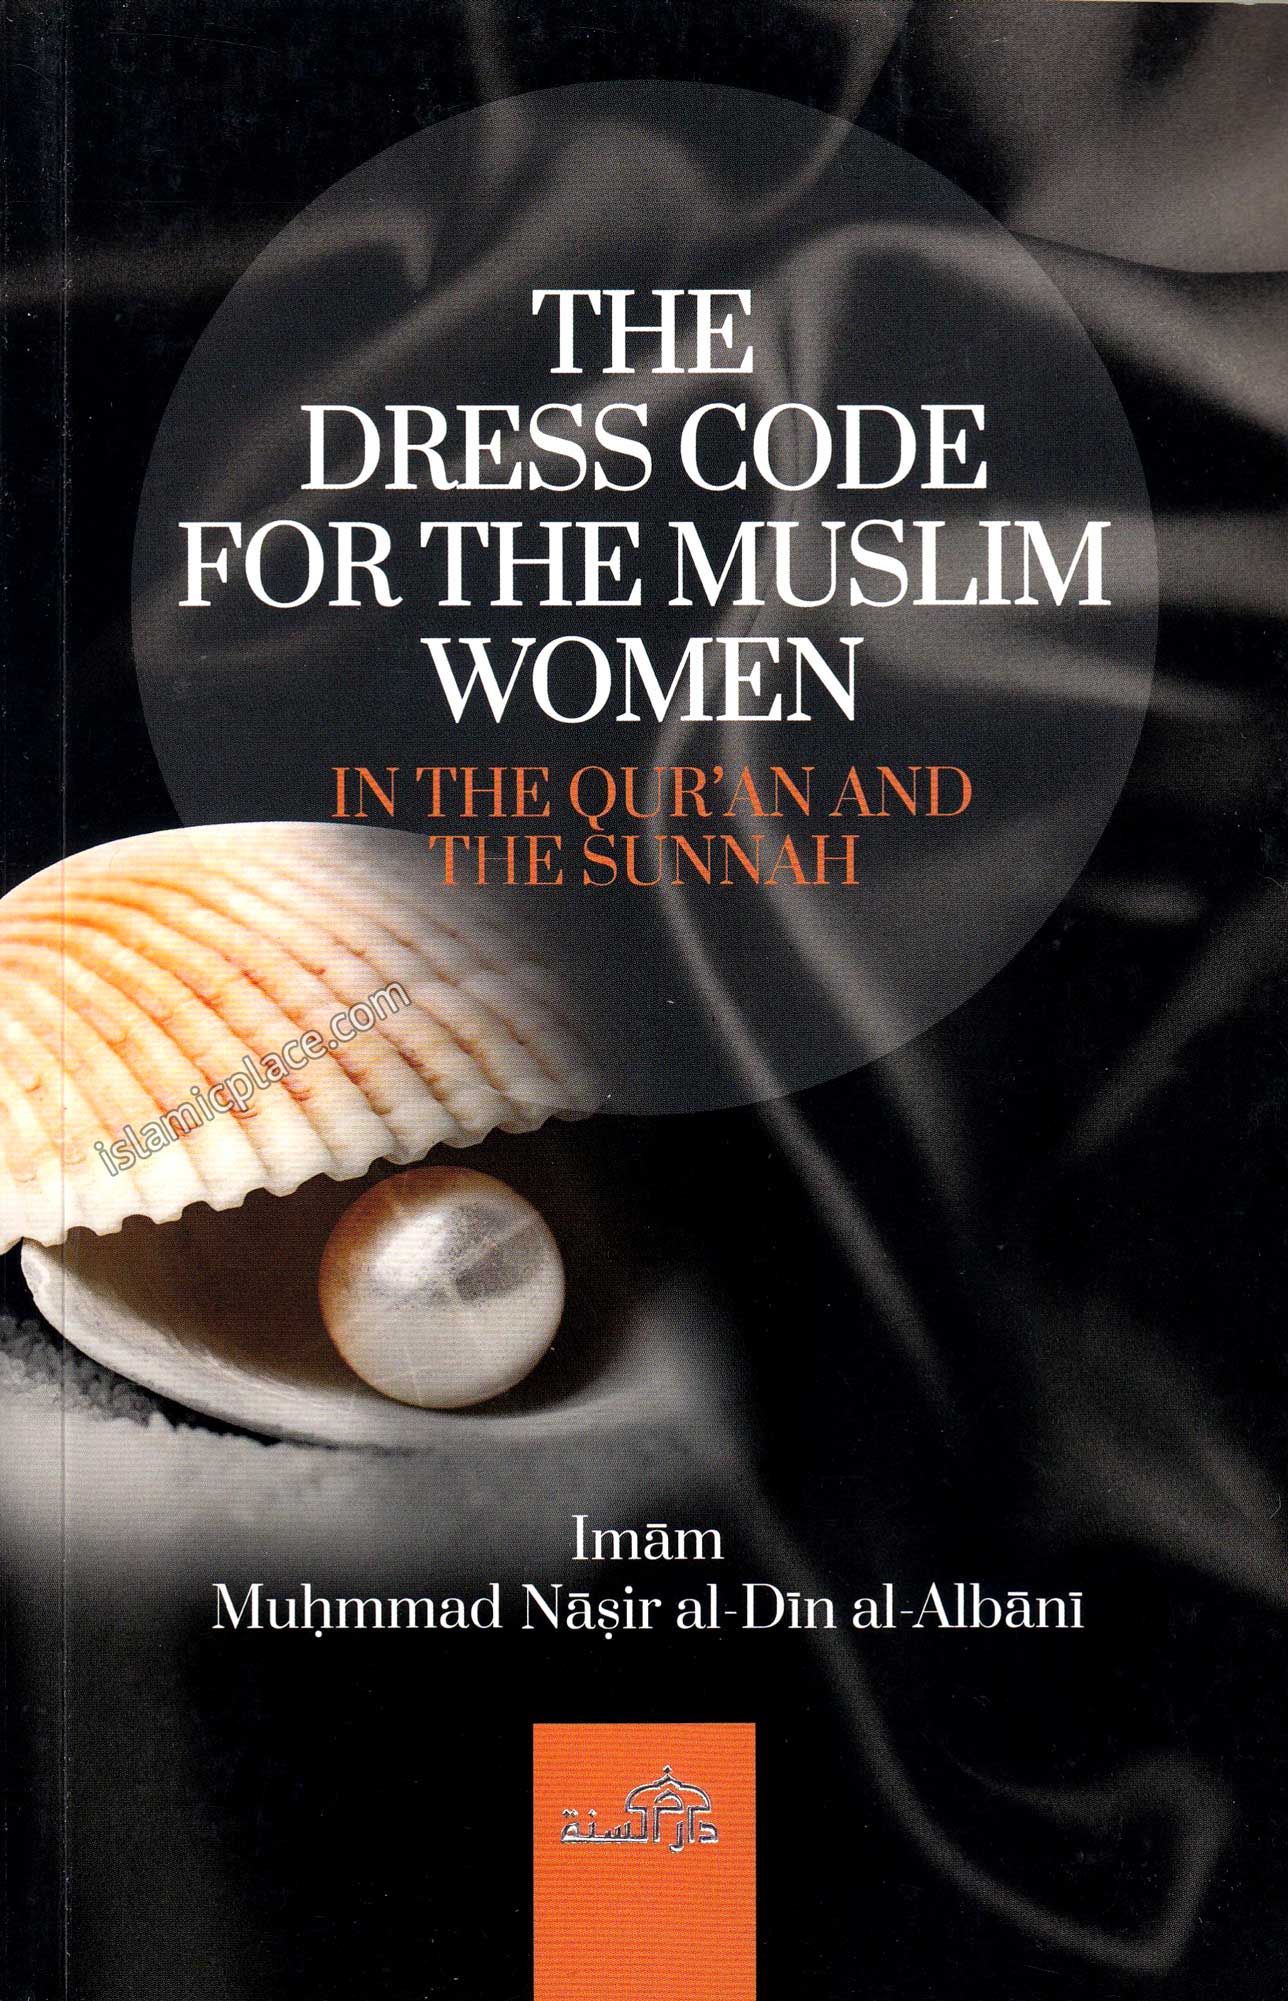 The Dress Code for the Muslim Women in the Qur'an and the Sunnah